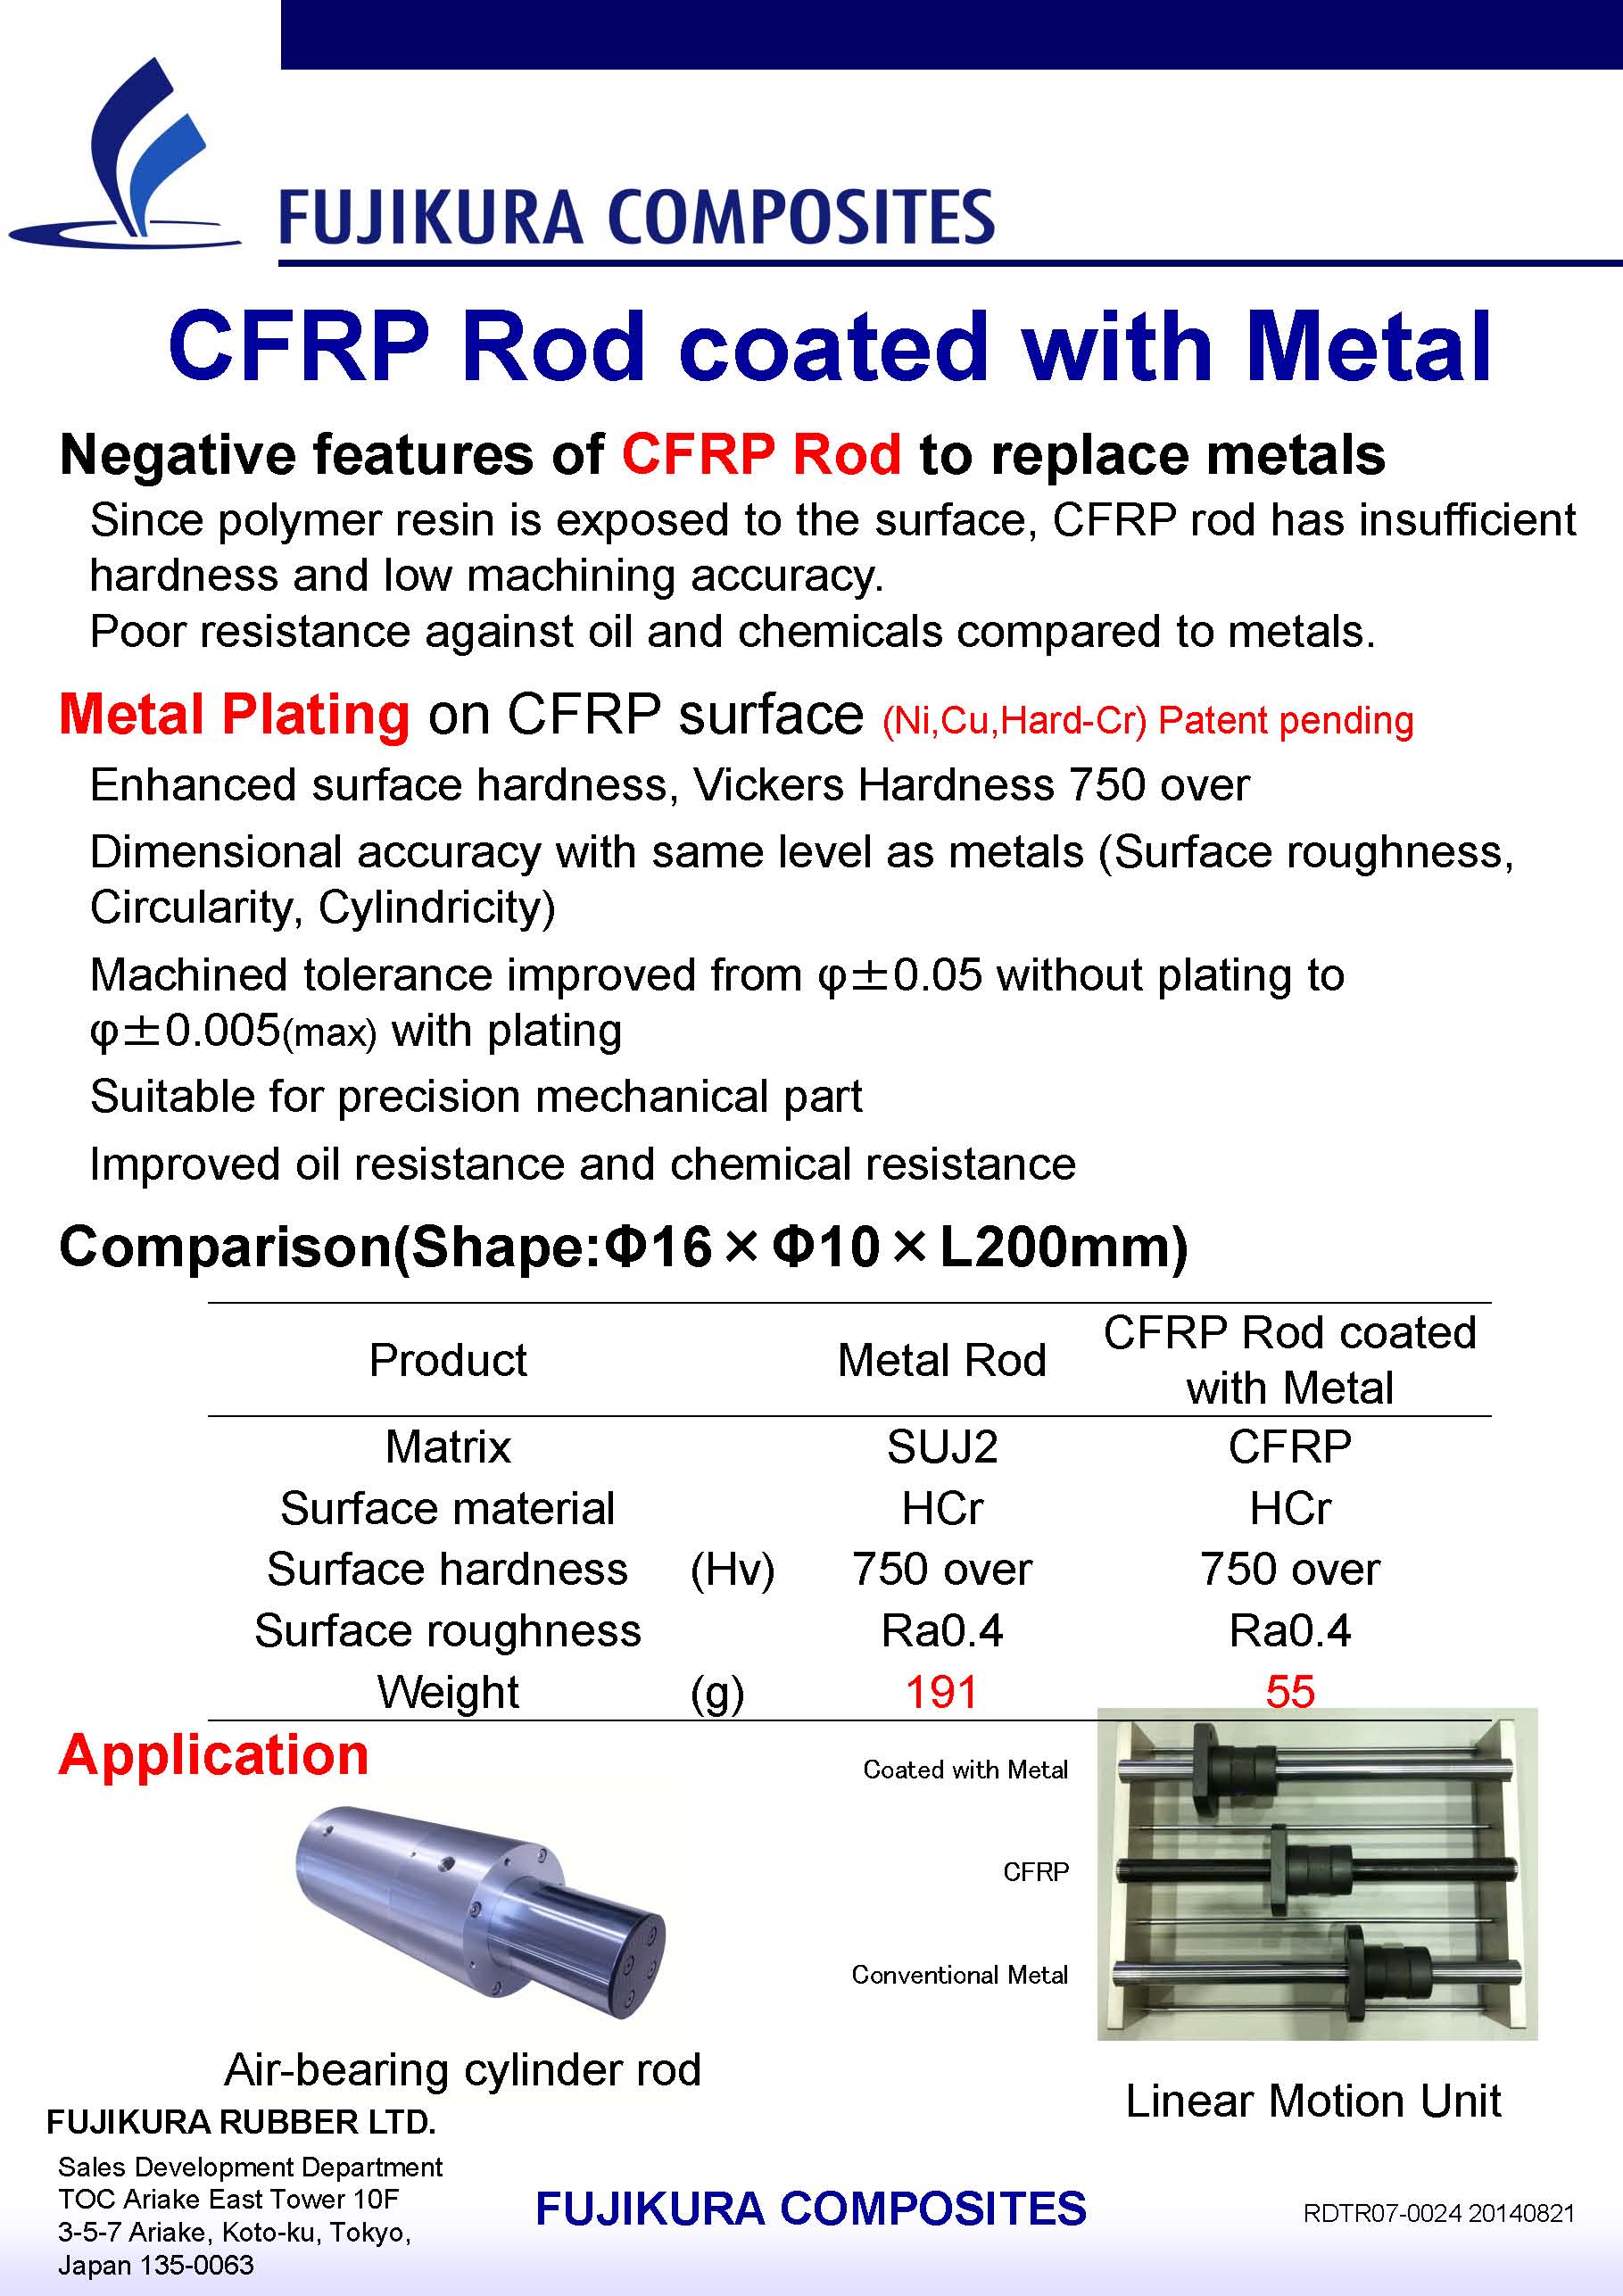 CFRP Rod coated with Metal